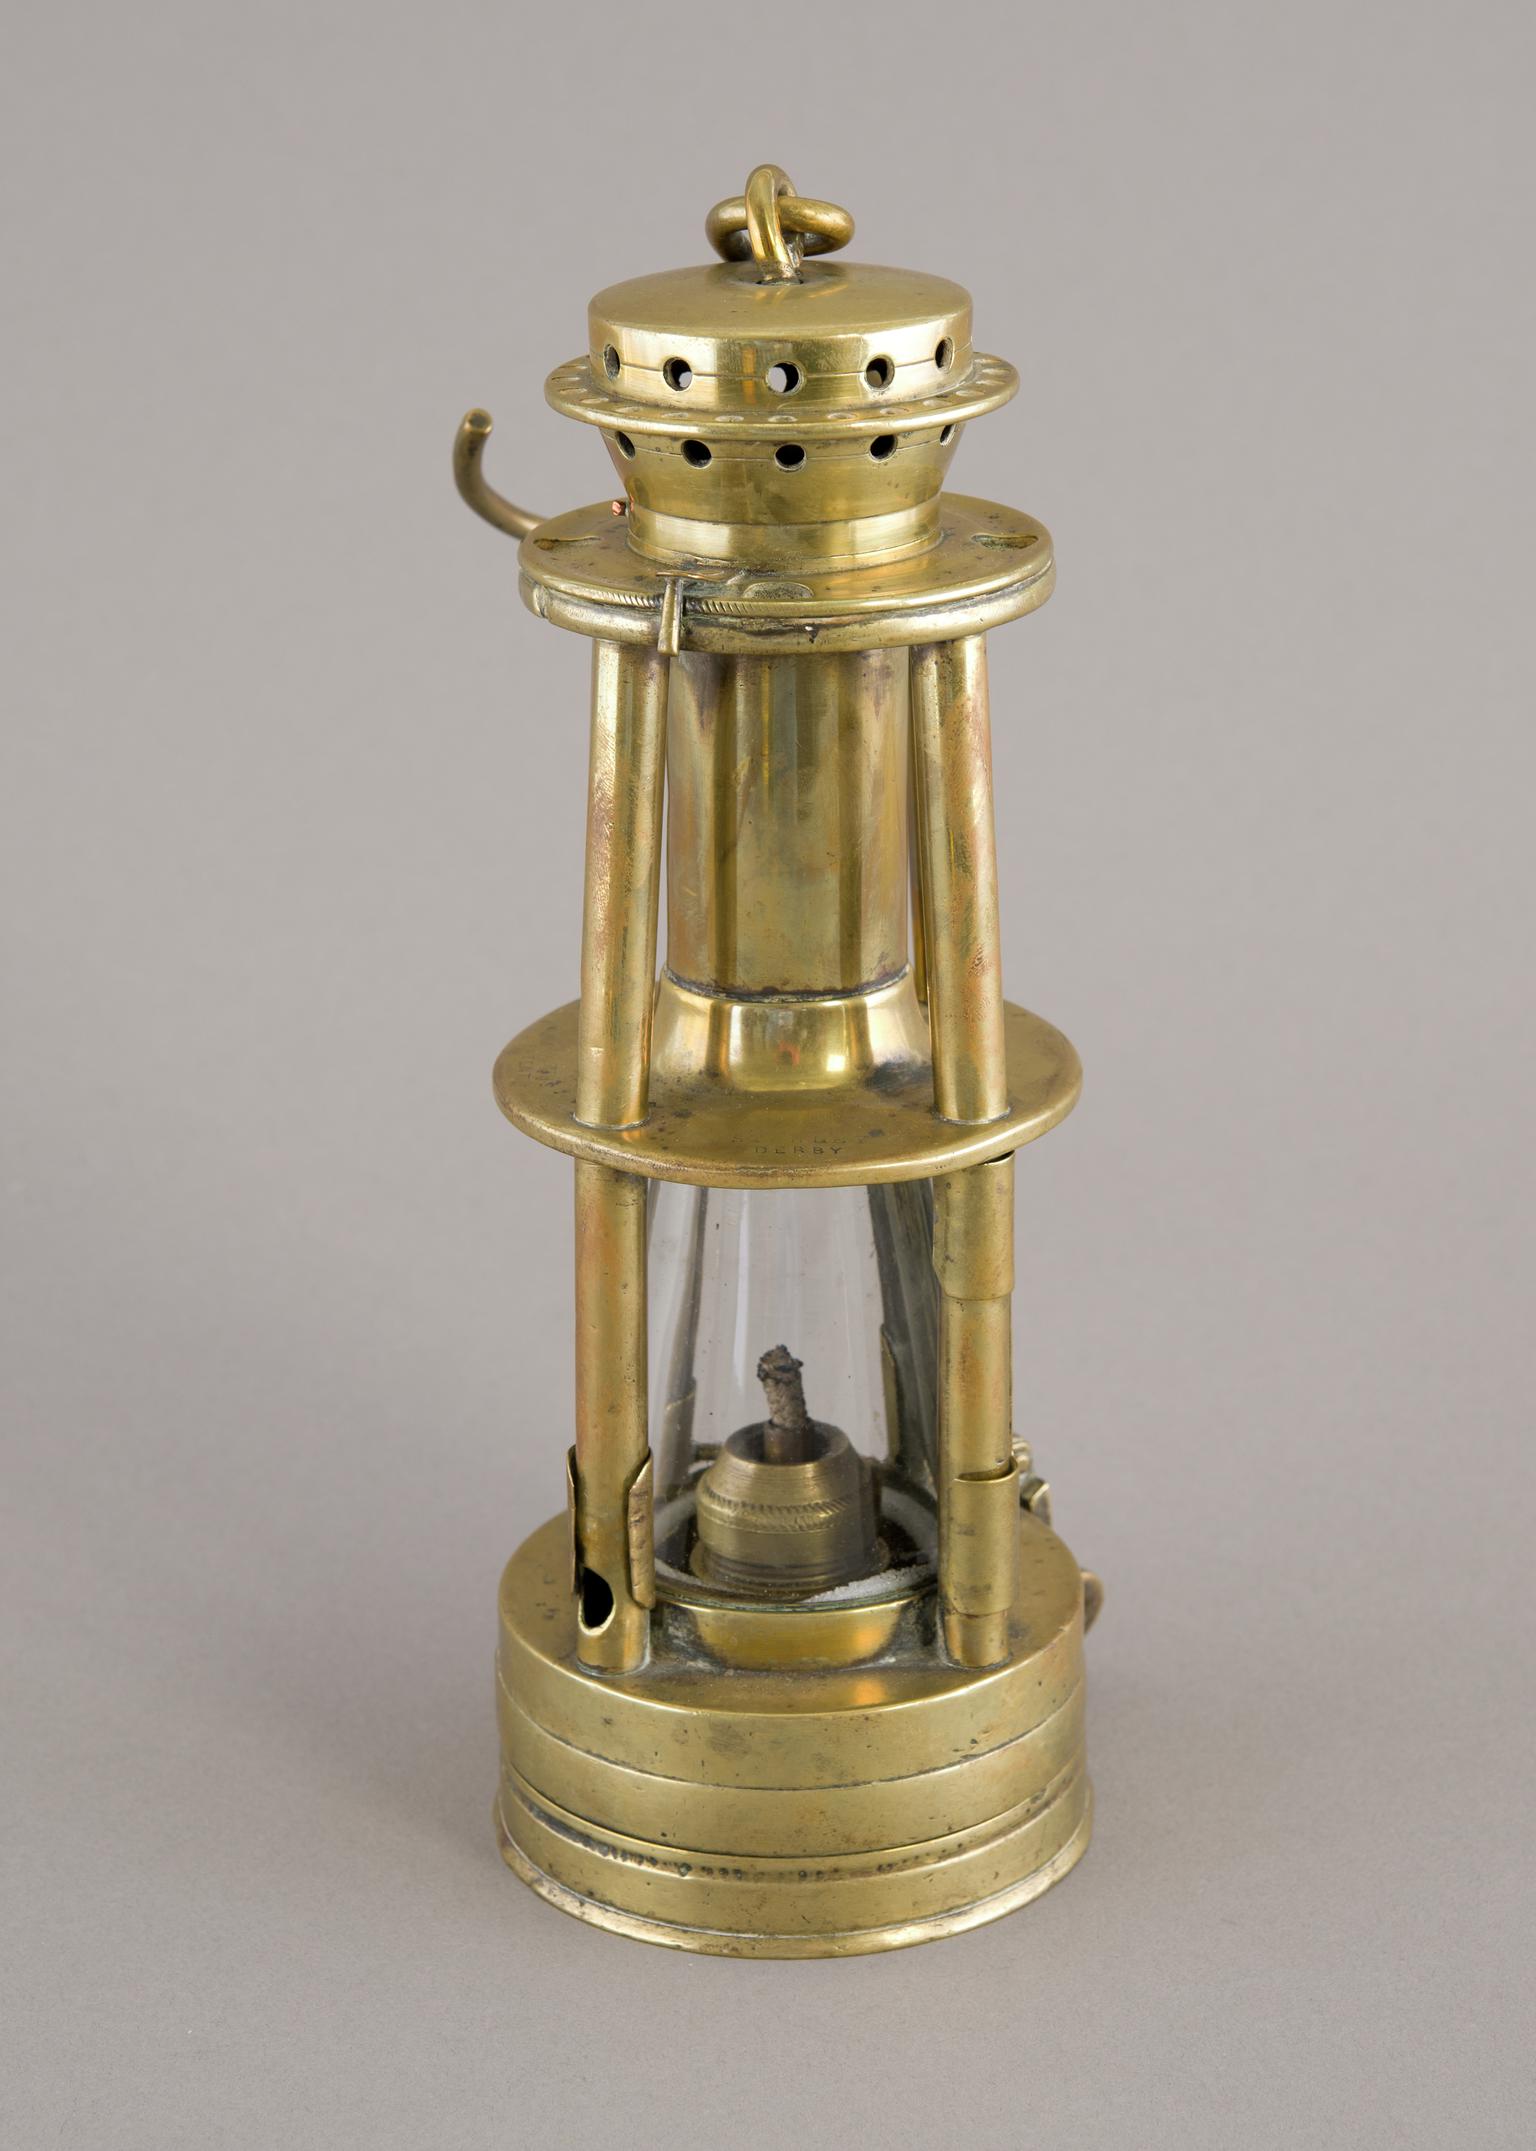 Hepplewhite Gray flame safety lamp